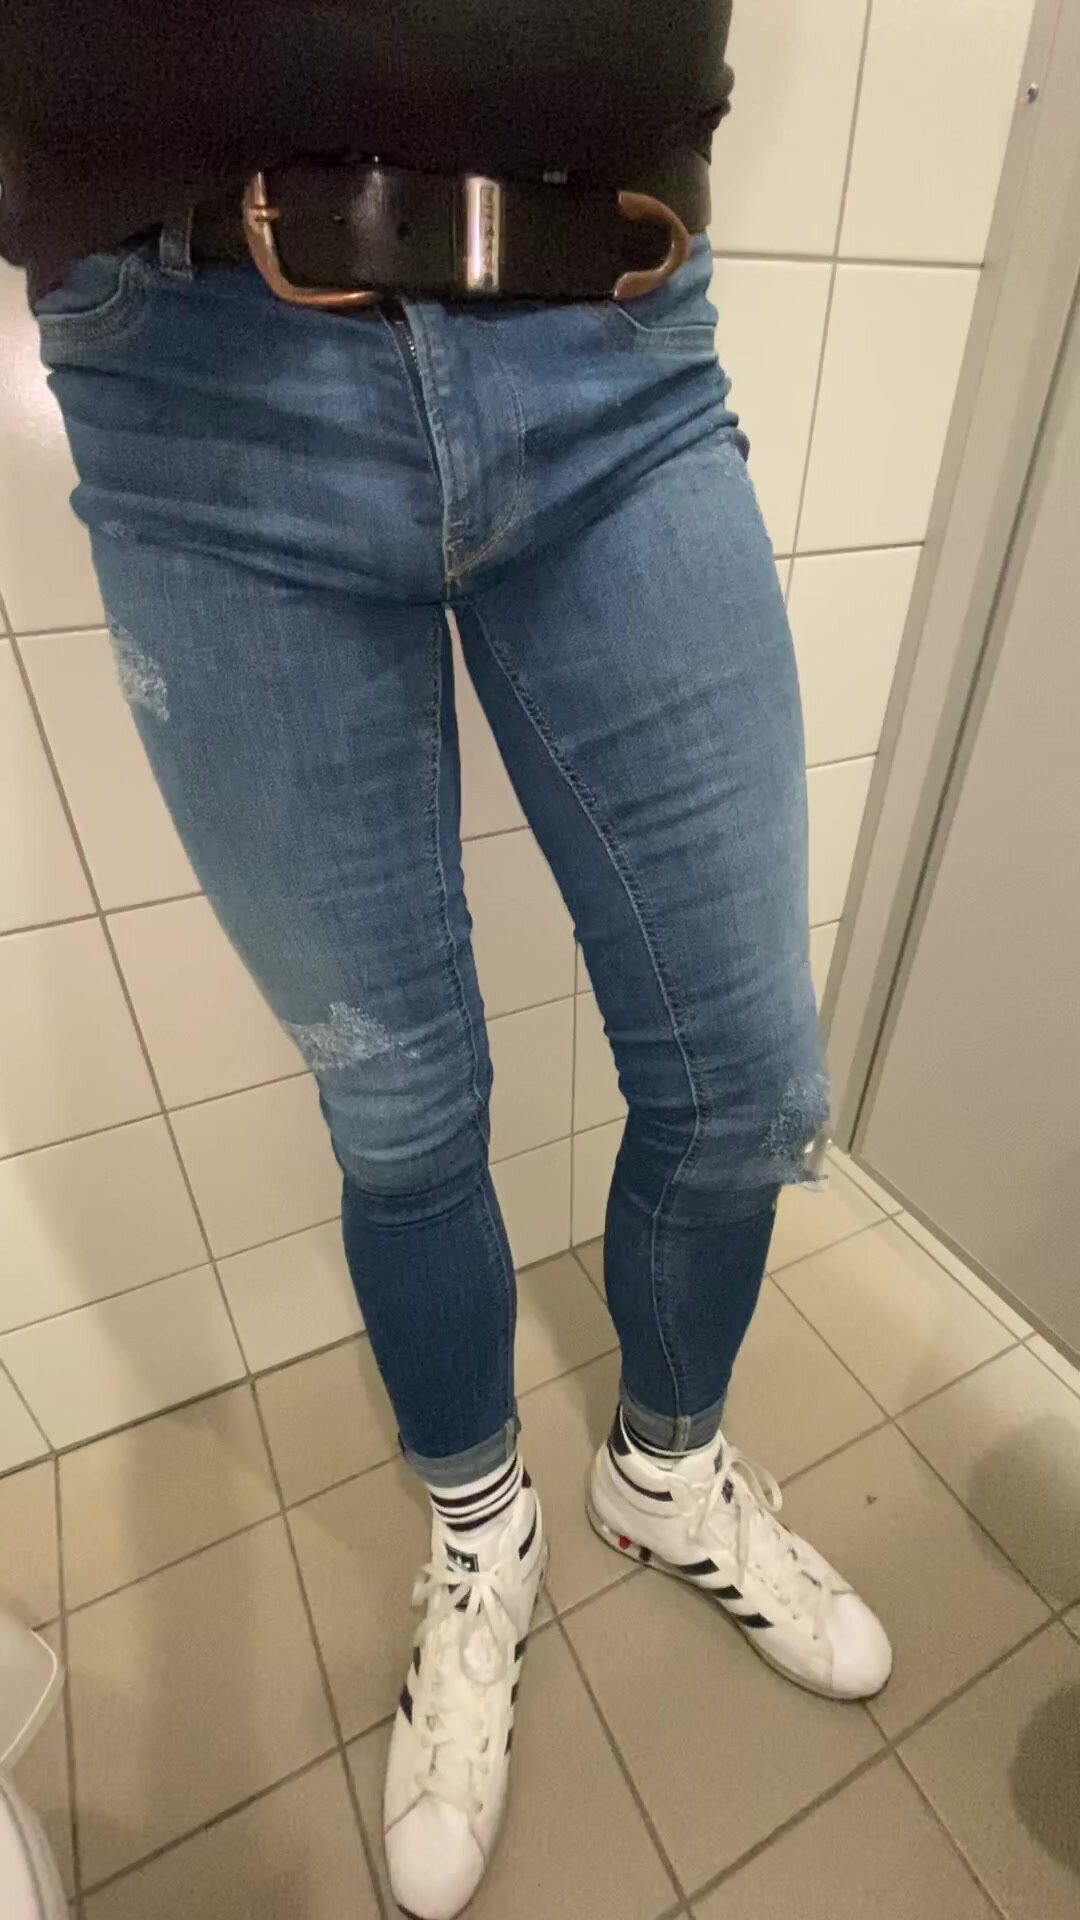 Pissing in jeans - video 8